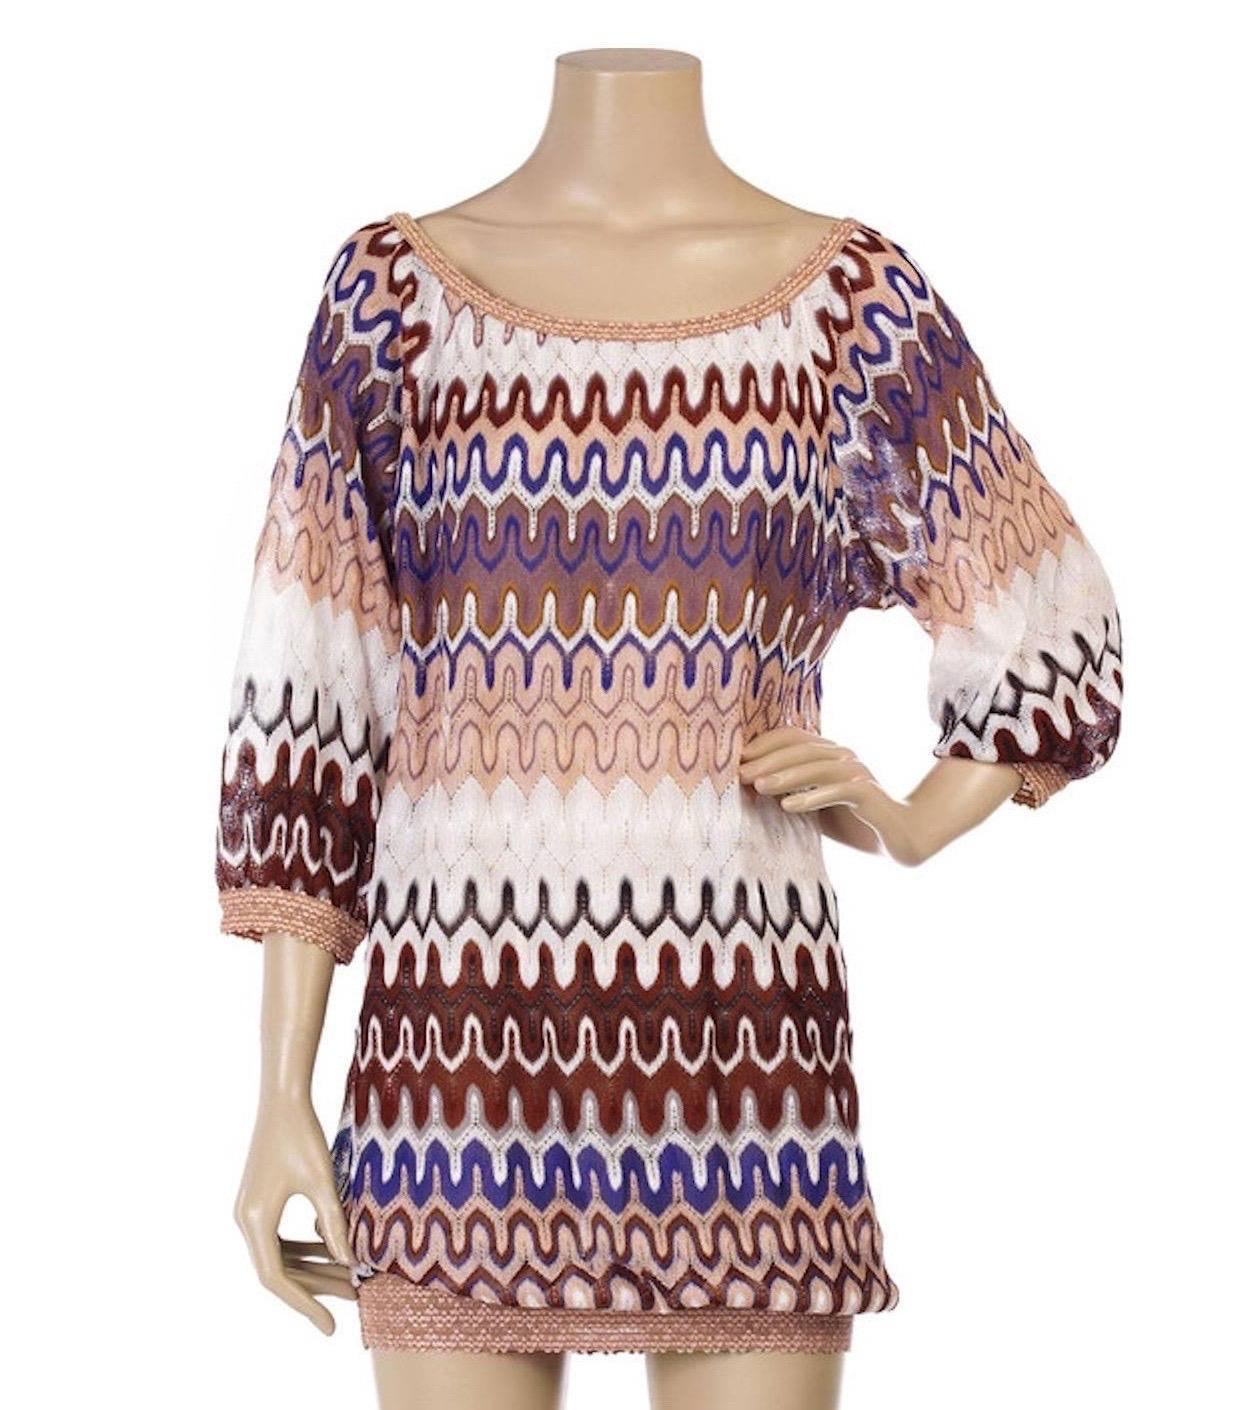 Stunning dress from MISSONI main line
Beautiful shades
Classic MISSONI signature zigzag crochet knit
Simply slips on
Bateau neck
Contrast trim
Elasticated neck and hem
100% Rayon
Dry Clean only
Size 40
New, unworn